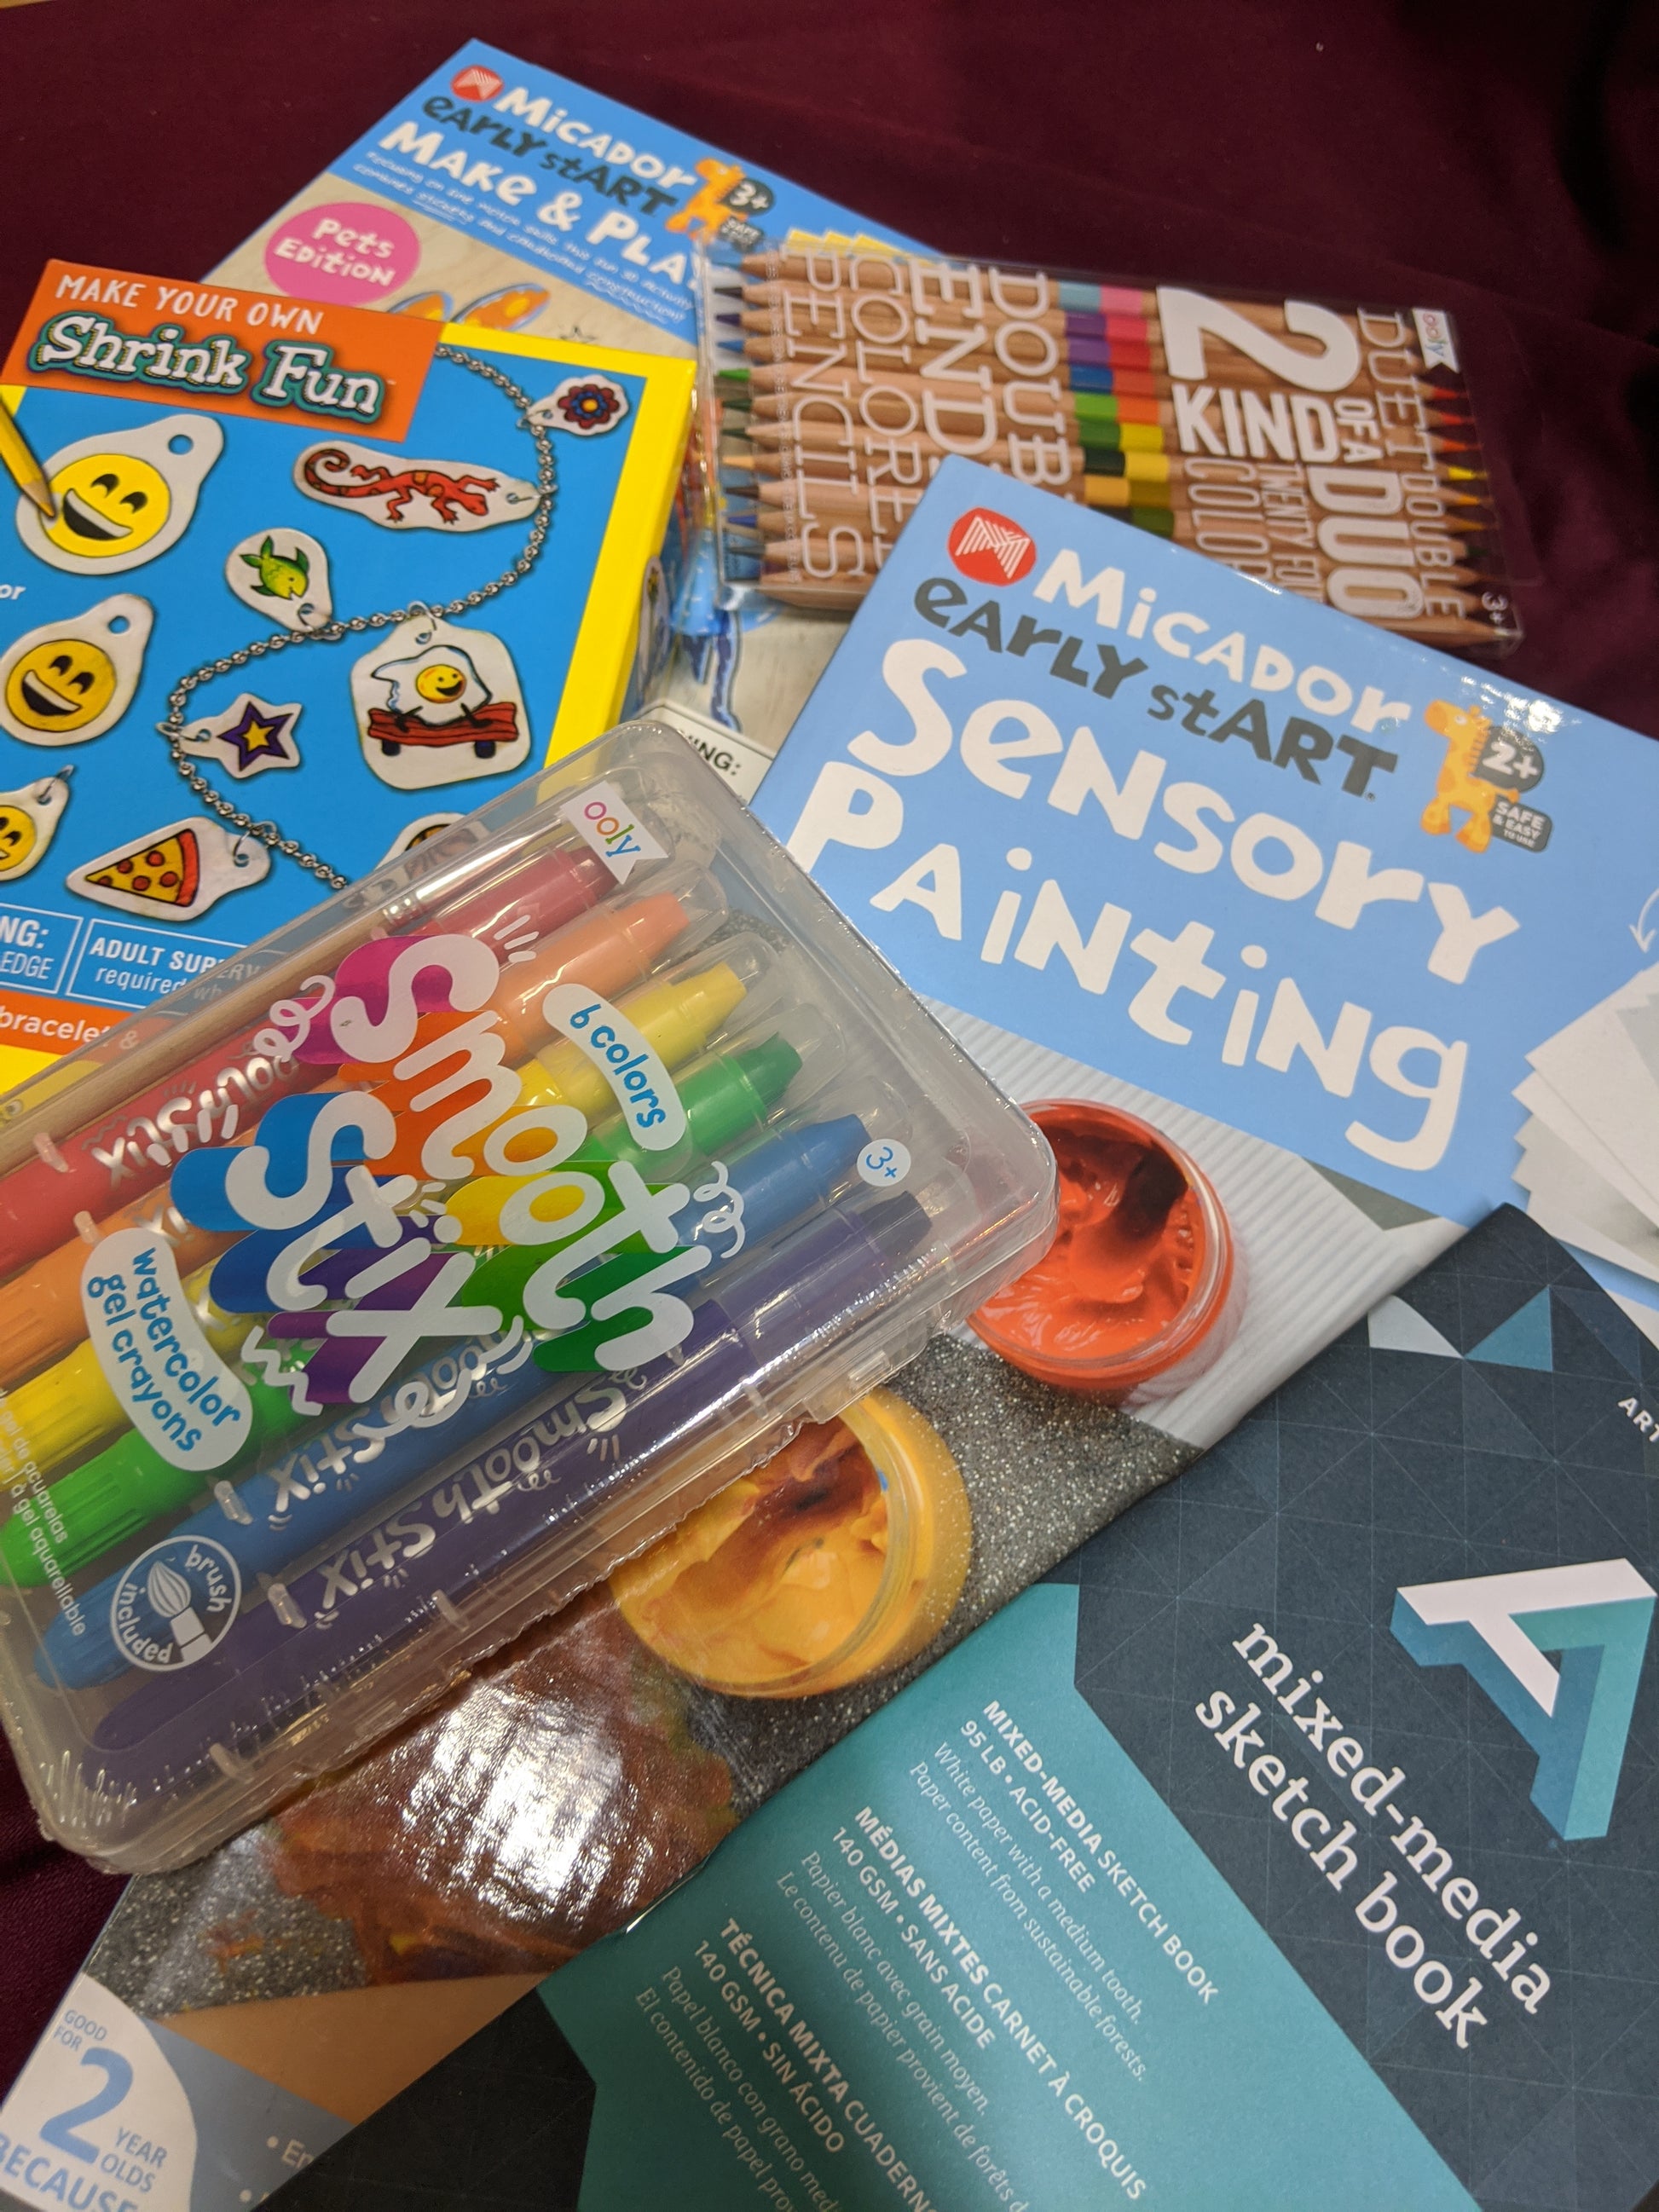 Our favorite art supplies for kids: The best supplies for creative